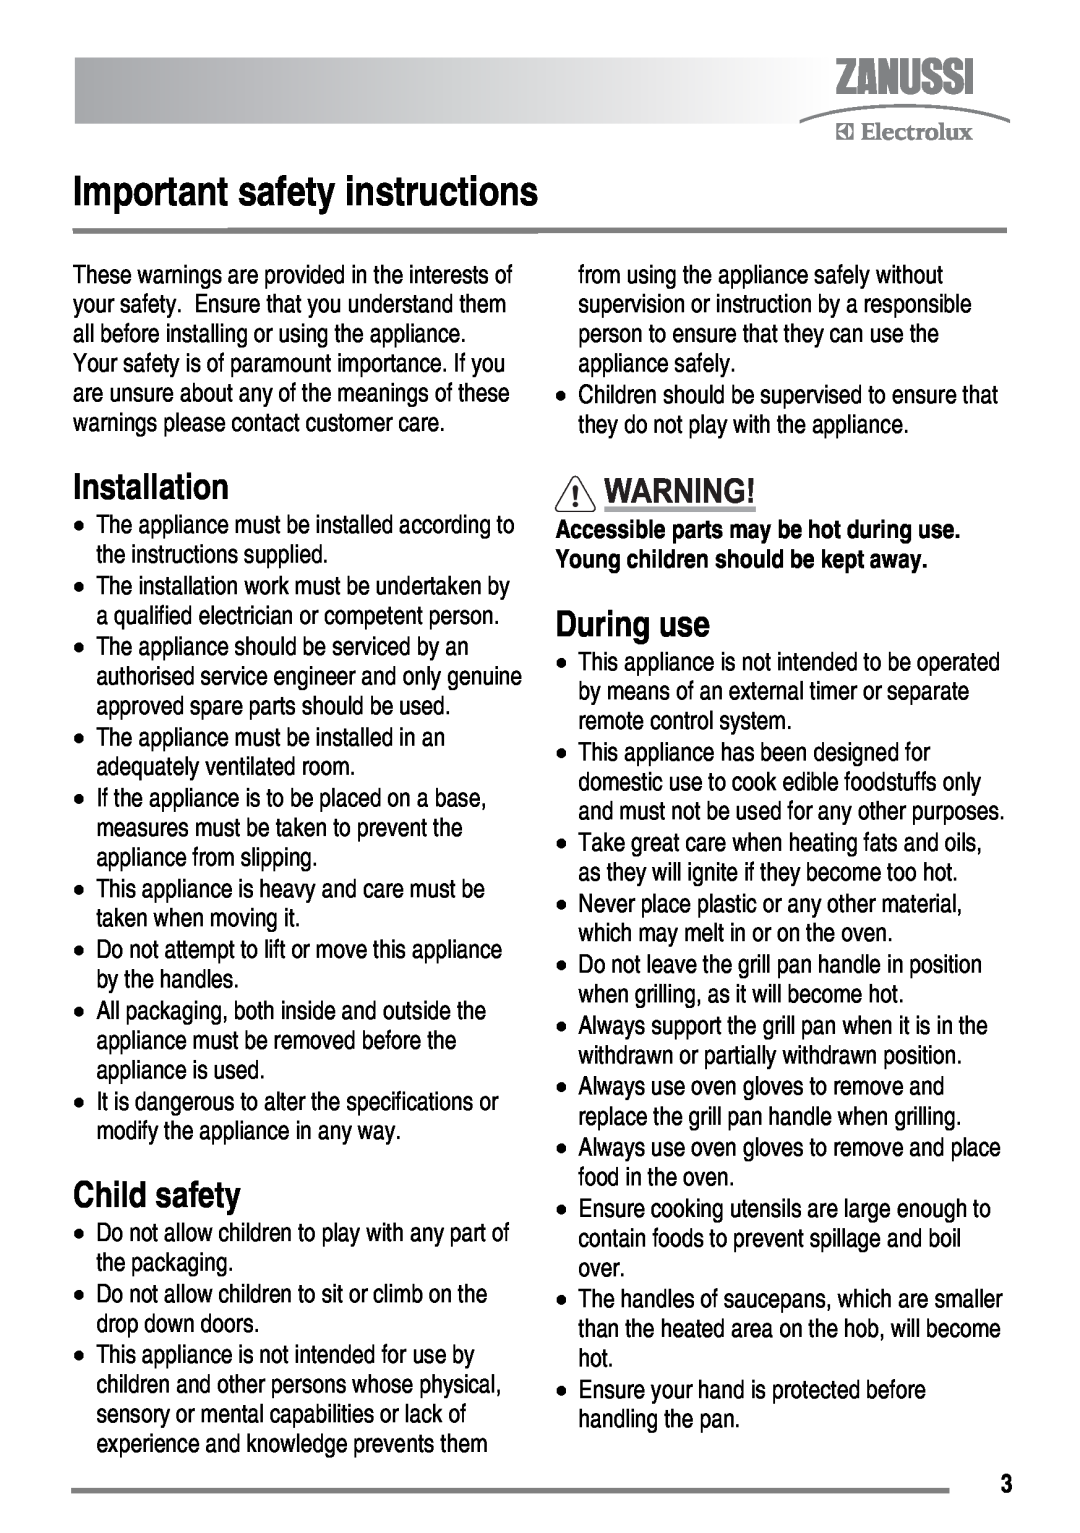 Zanussi ZKC6010 user manual Important safety instructions, Installation, Child safety, During use 